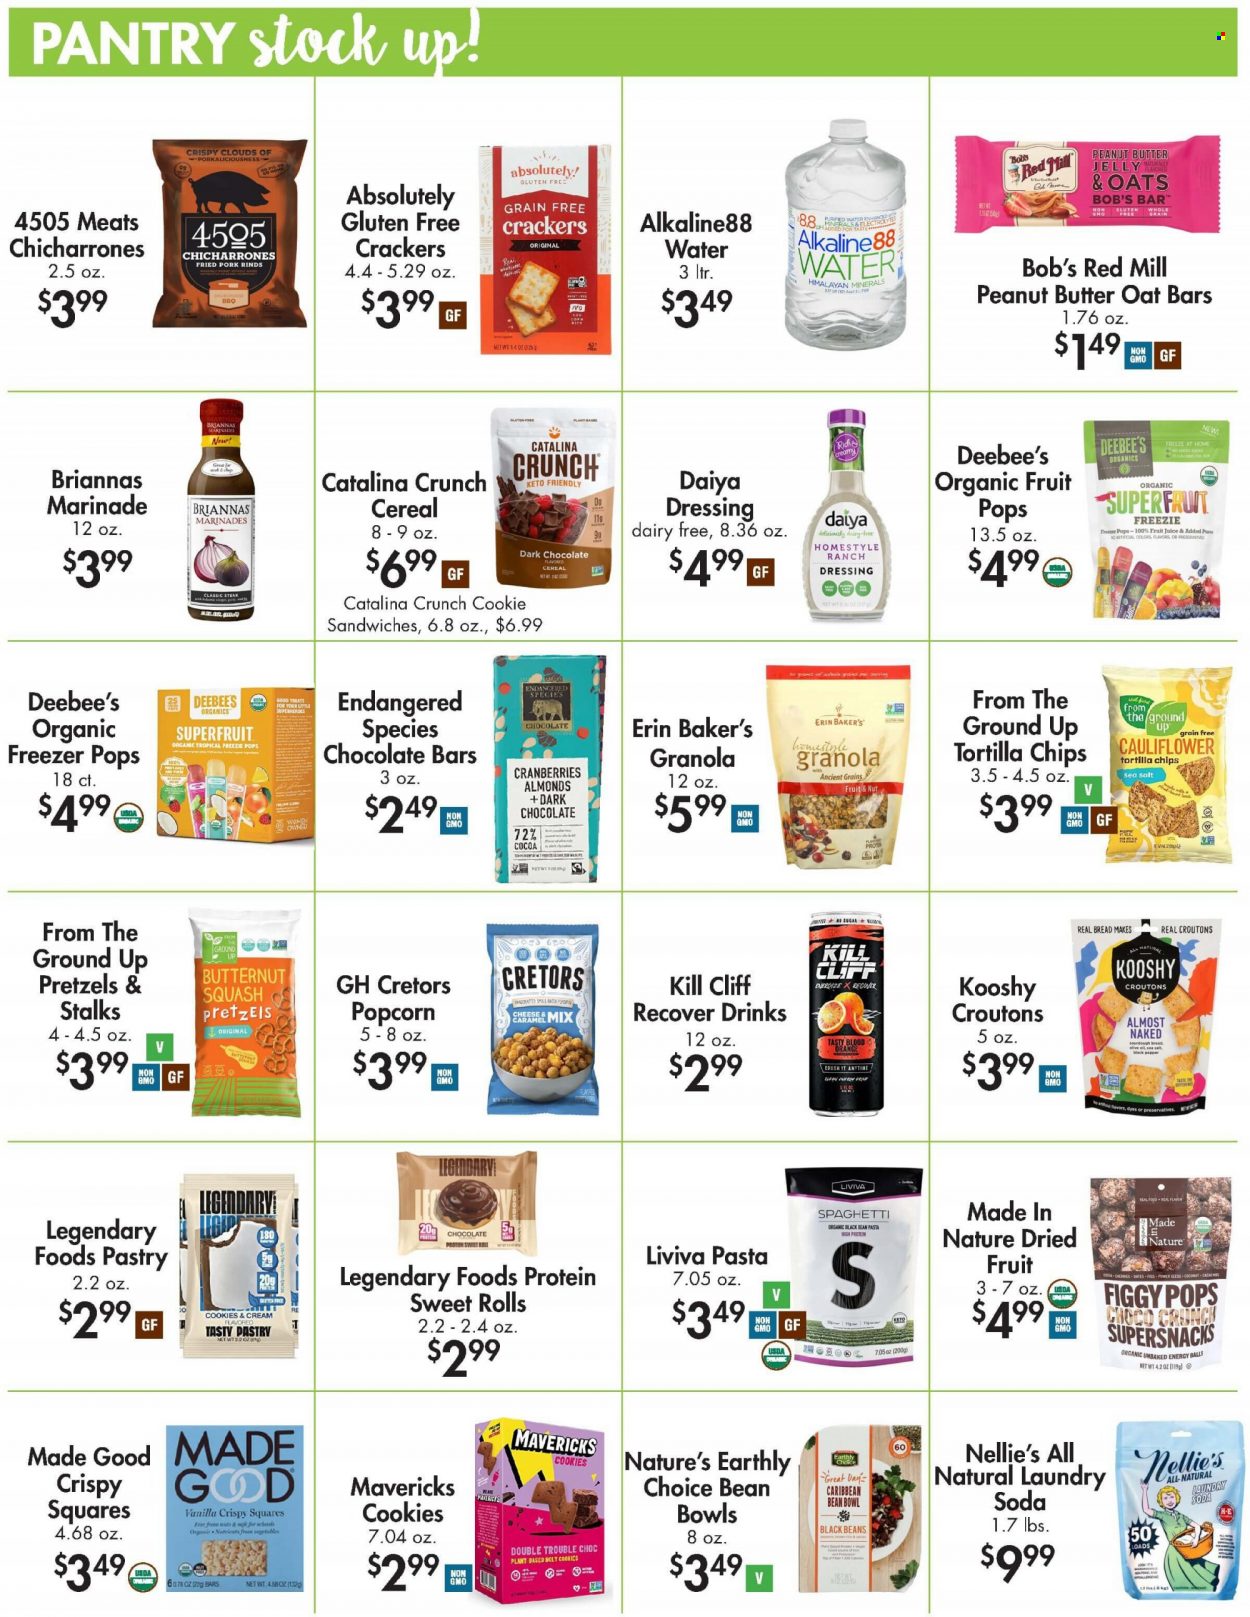 thumbnail - Buehler's Flyer - 04/26/2023 - 05/30/2023 - Sales products - bread, pretzels, sweet rolls, beans, butternut squash, figs, cherries, spaghetti, pasta, ranch dressing, cookies, jelly, crackers, dark chocolate, chocolate bar, tortilla chips, chips, popcorn, cocoa, croutons, black beans, cranberries, cereals, granola, dressing, marinade, peanut butter, almonds, dried fruit, juice, fruit juice, energy drink, purified water, water, Sol, steak, bowl. Page 3.